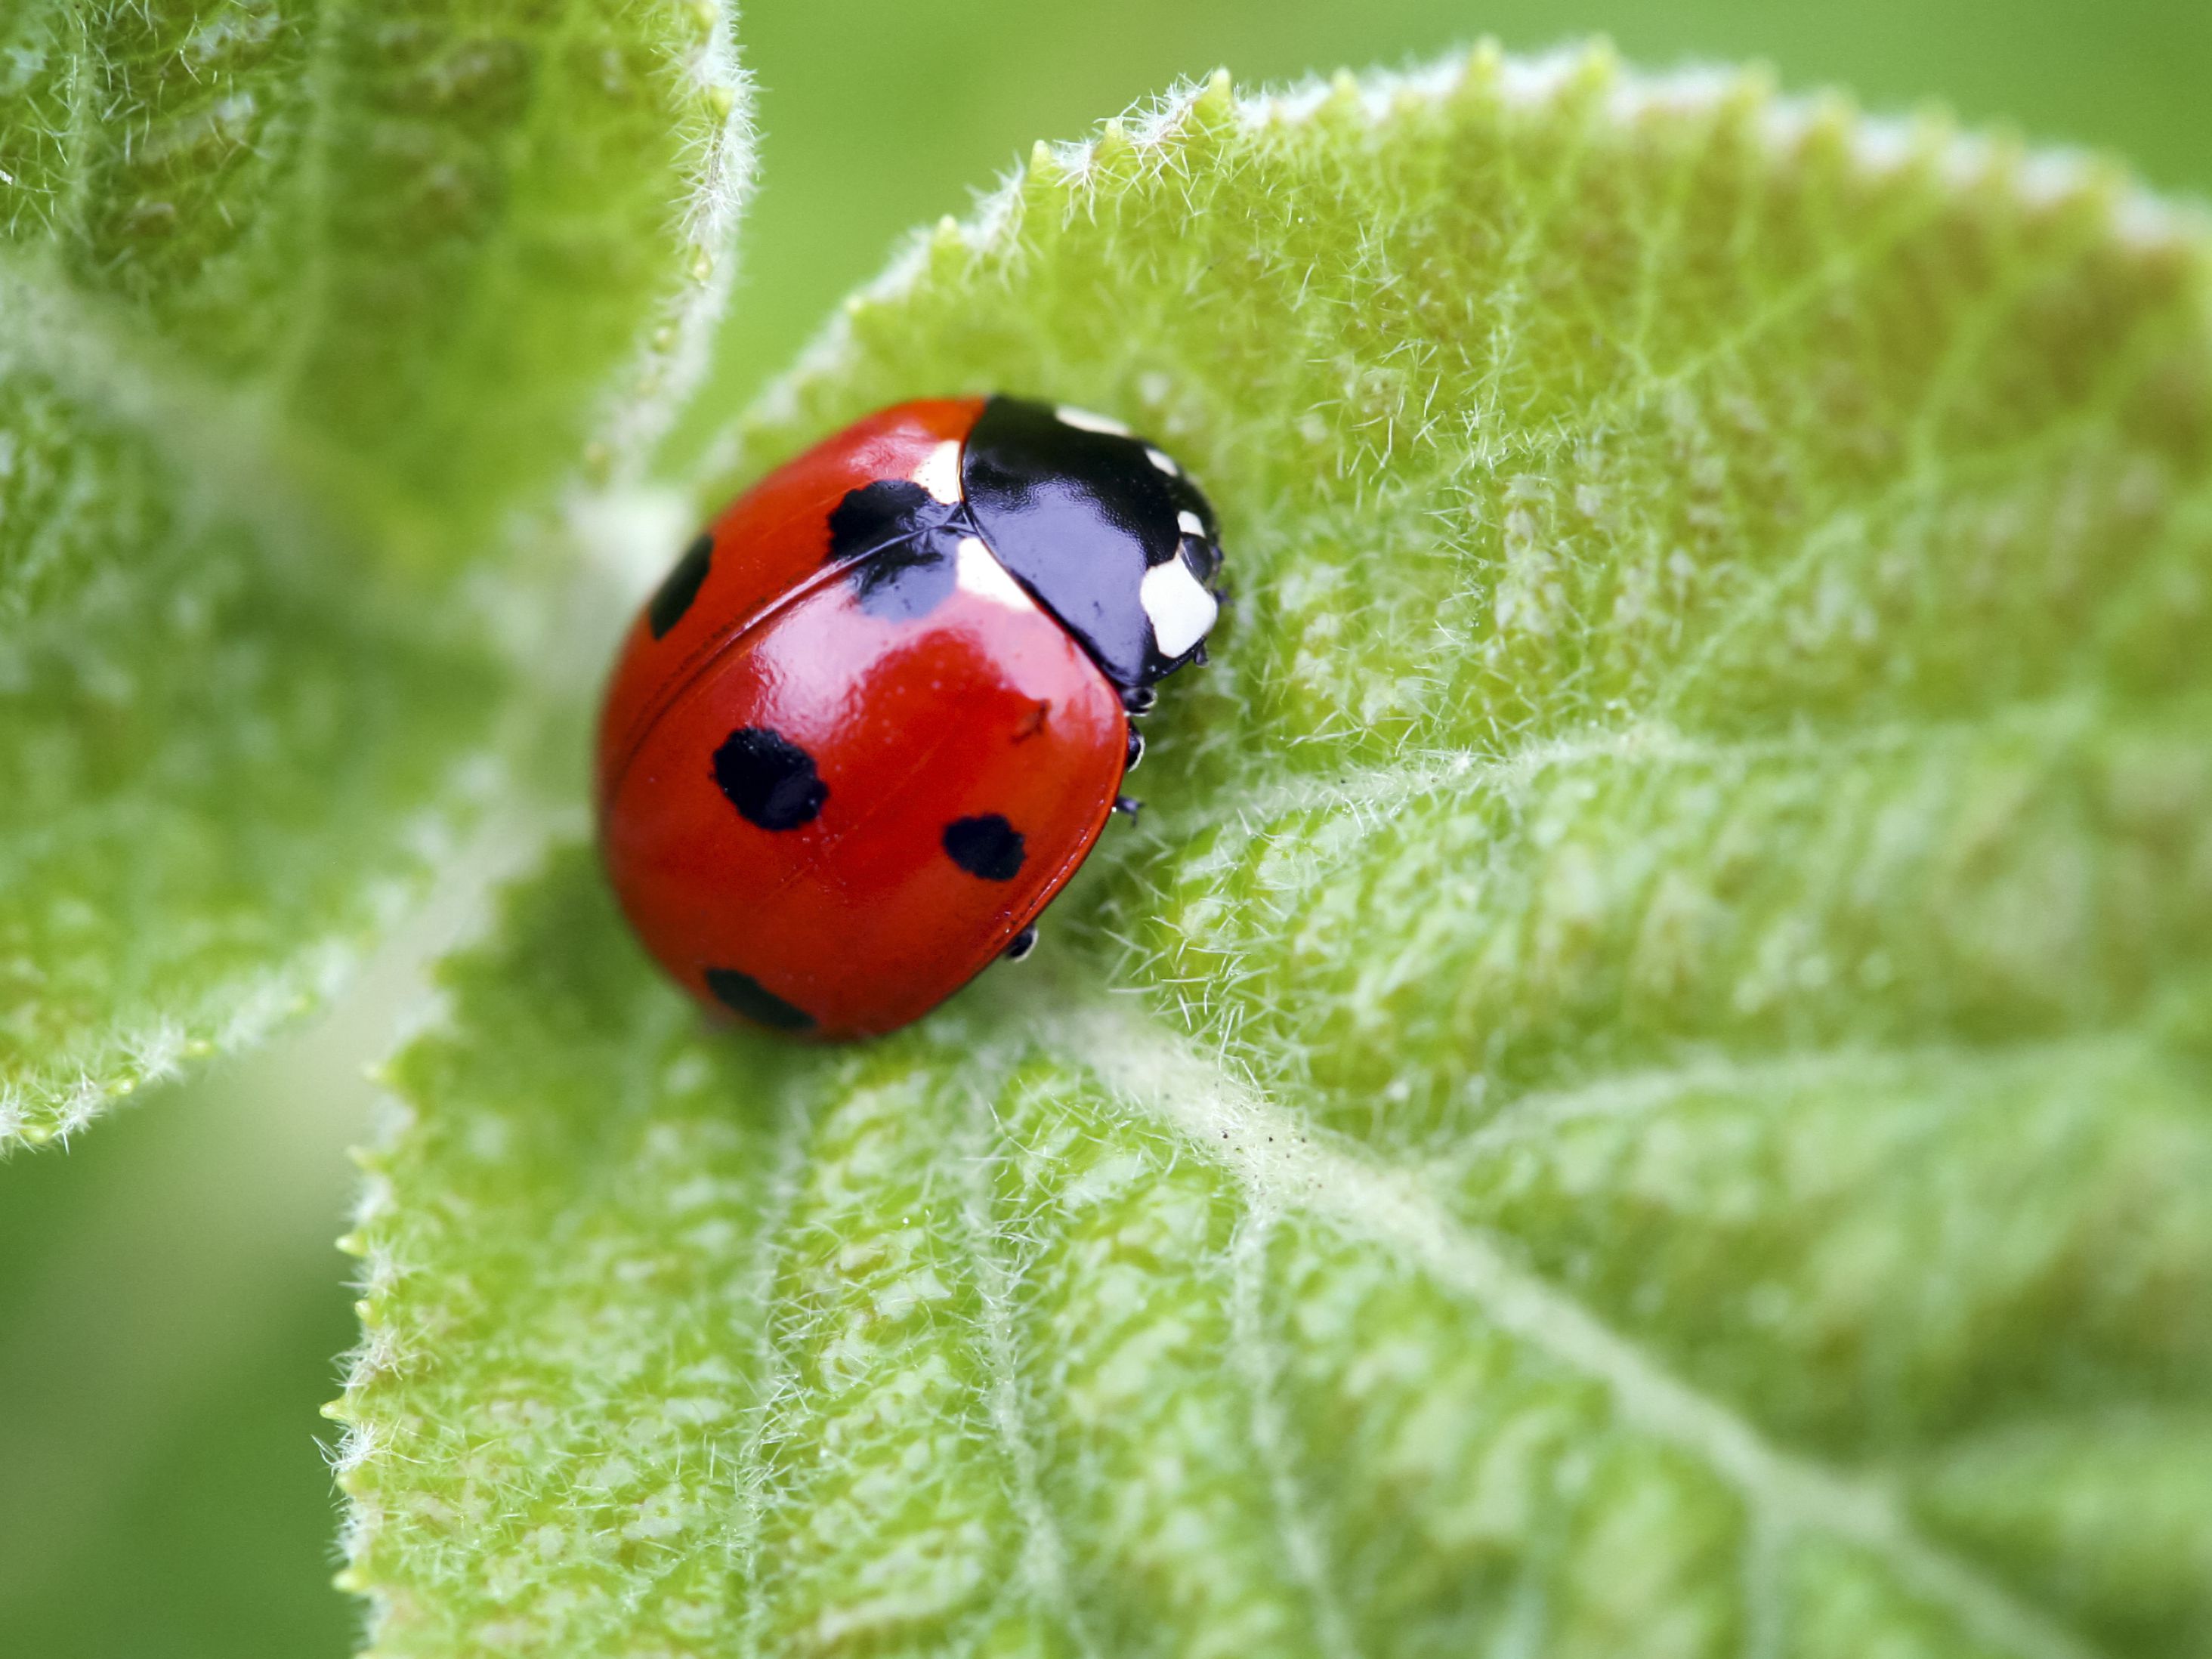 Do ladybugs have red spots?